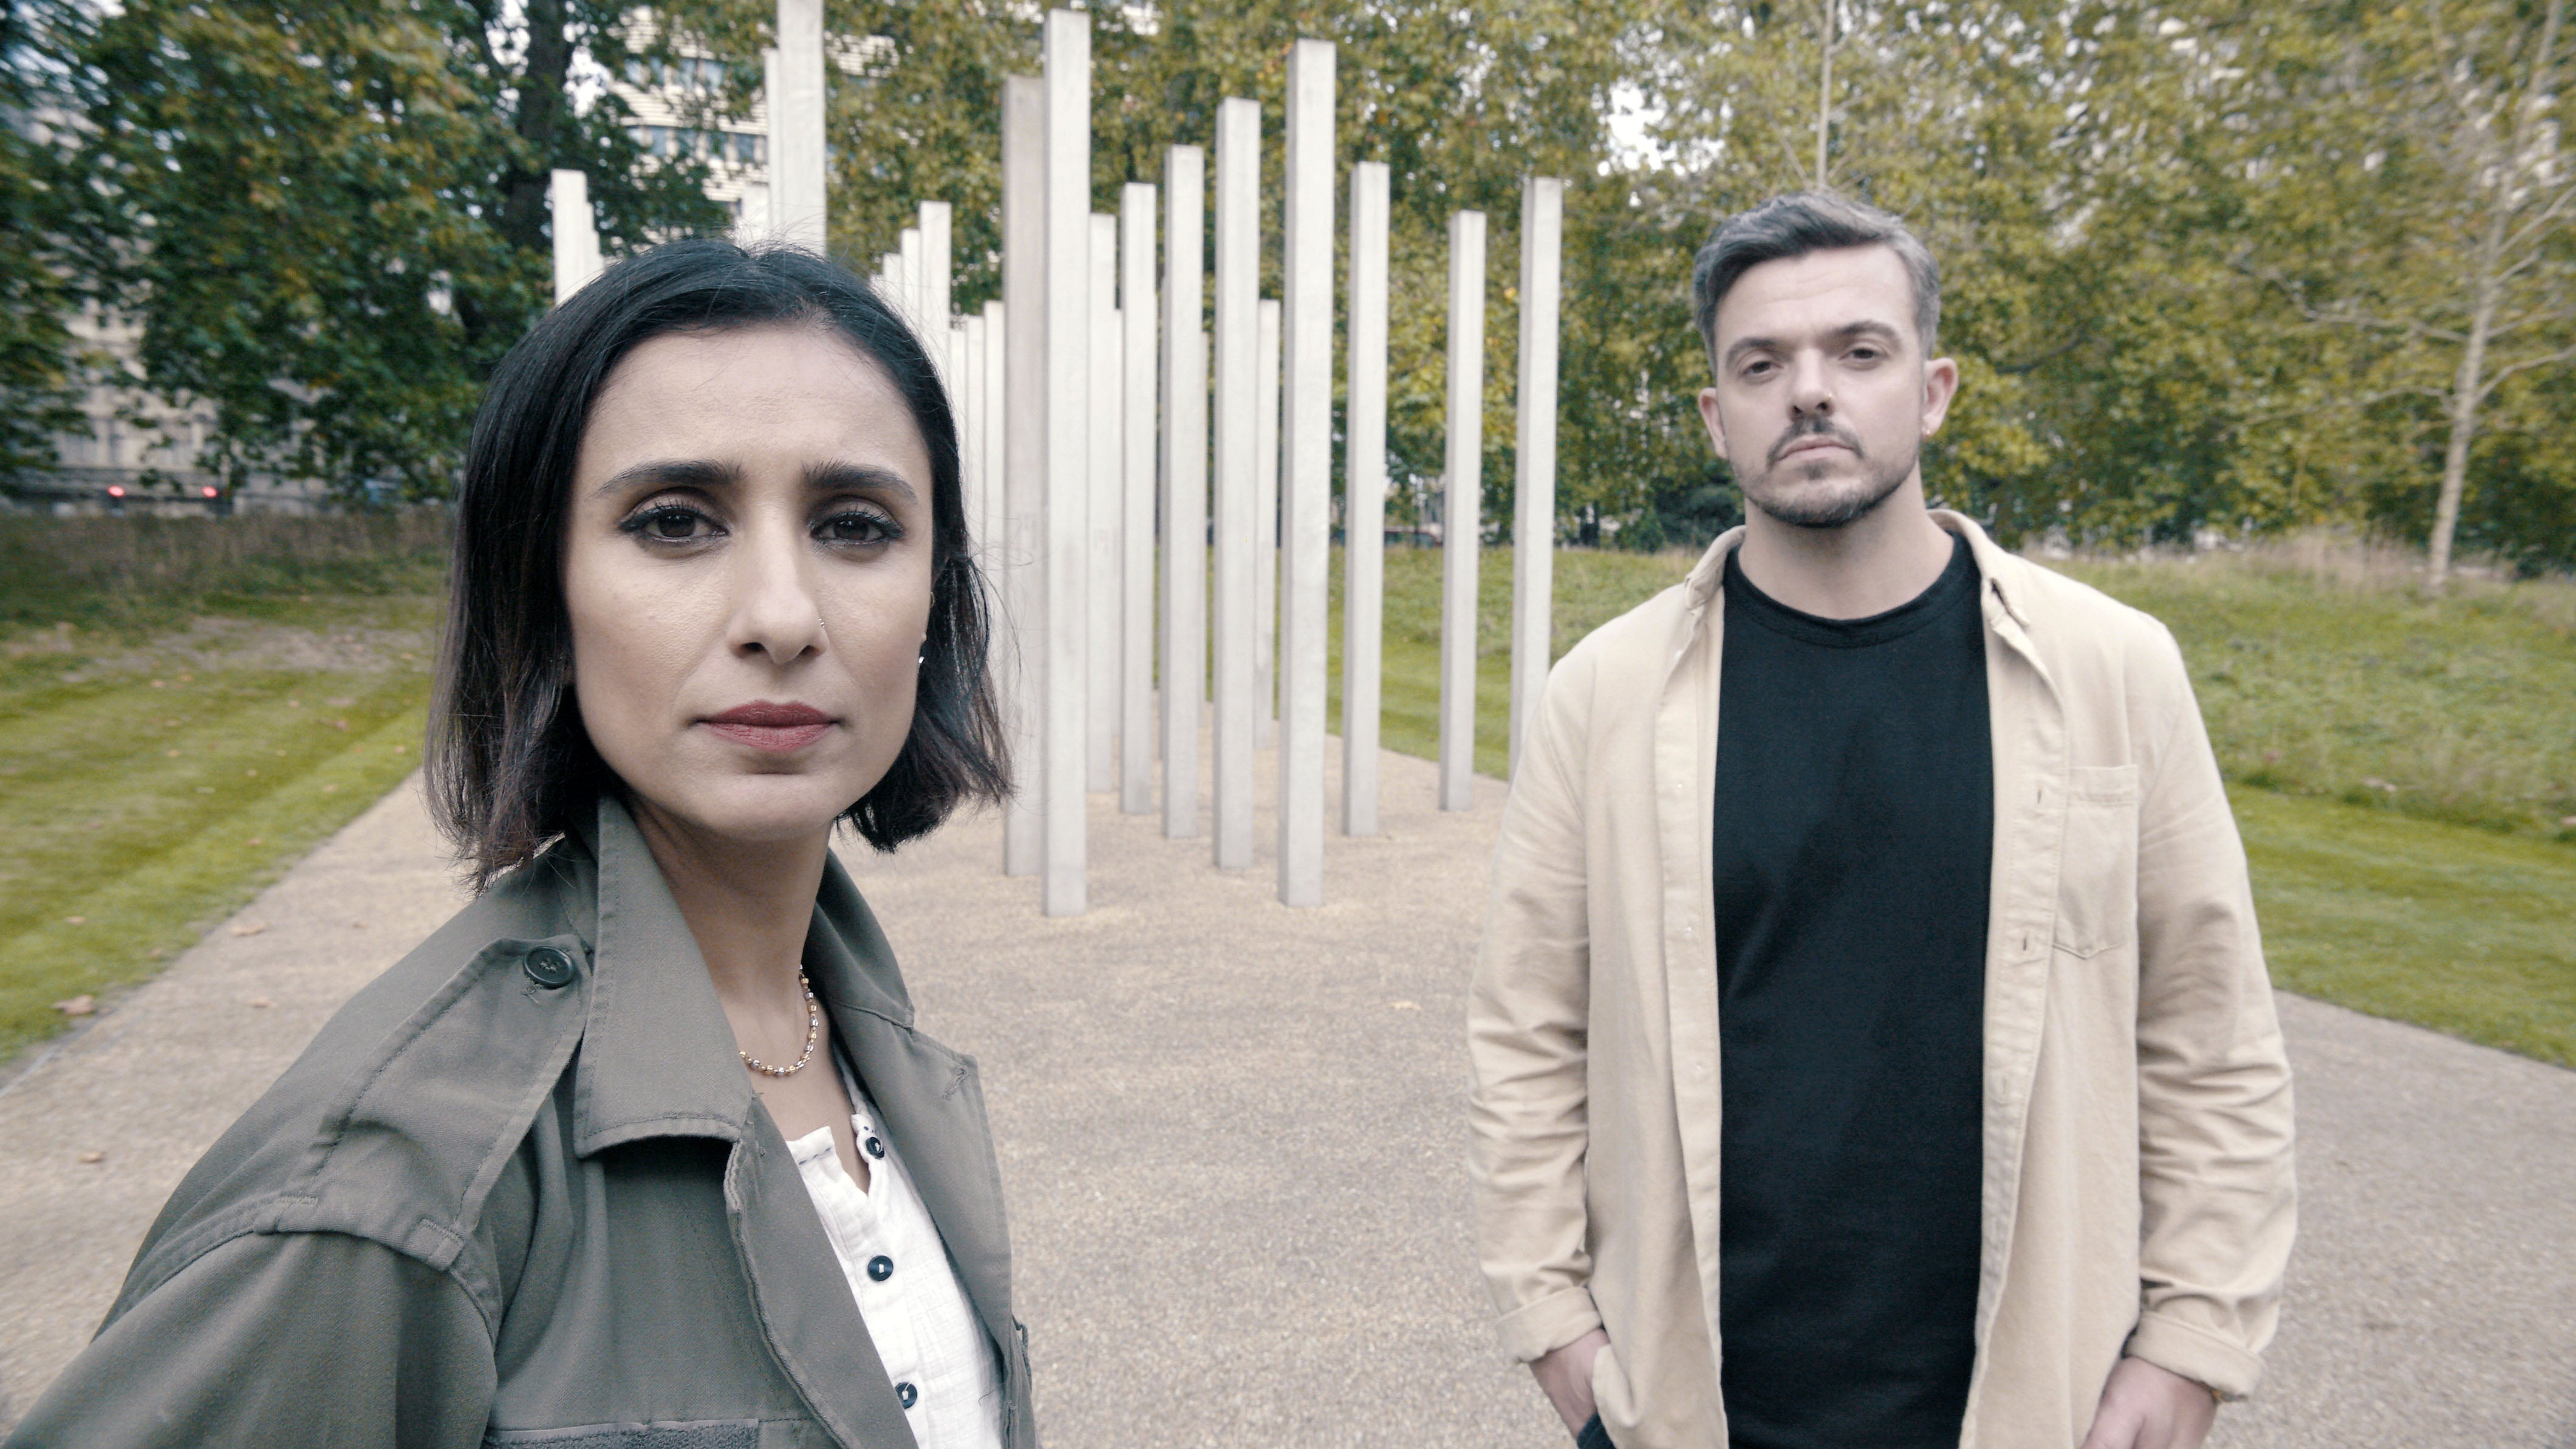 Anita Rani and Karl who search for the mystery woman who comforted him on the tube after the 7/7 bombings in BBC2’s ‘Saved by a Stranger’